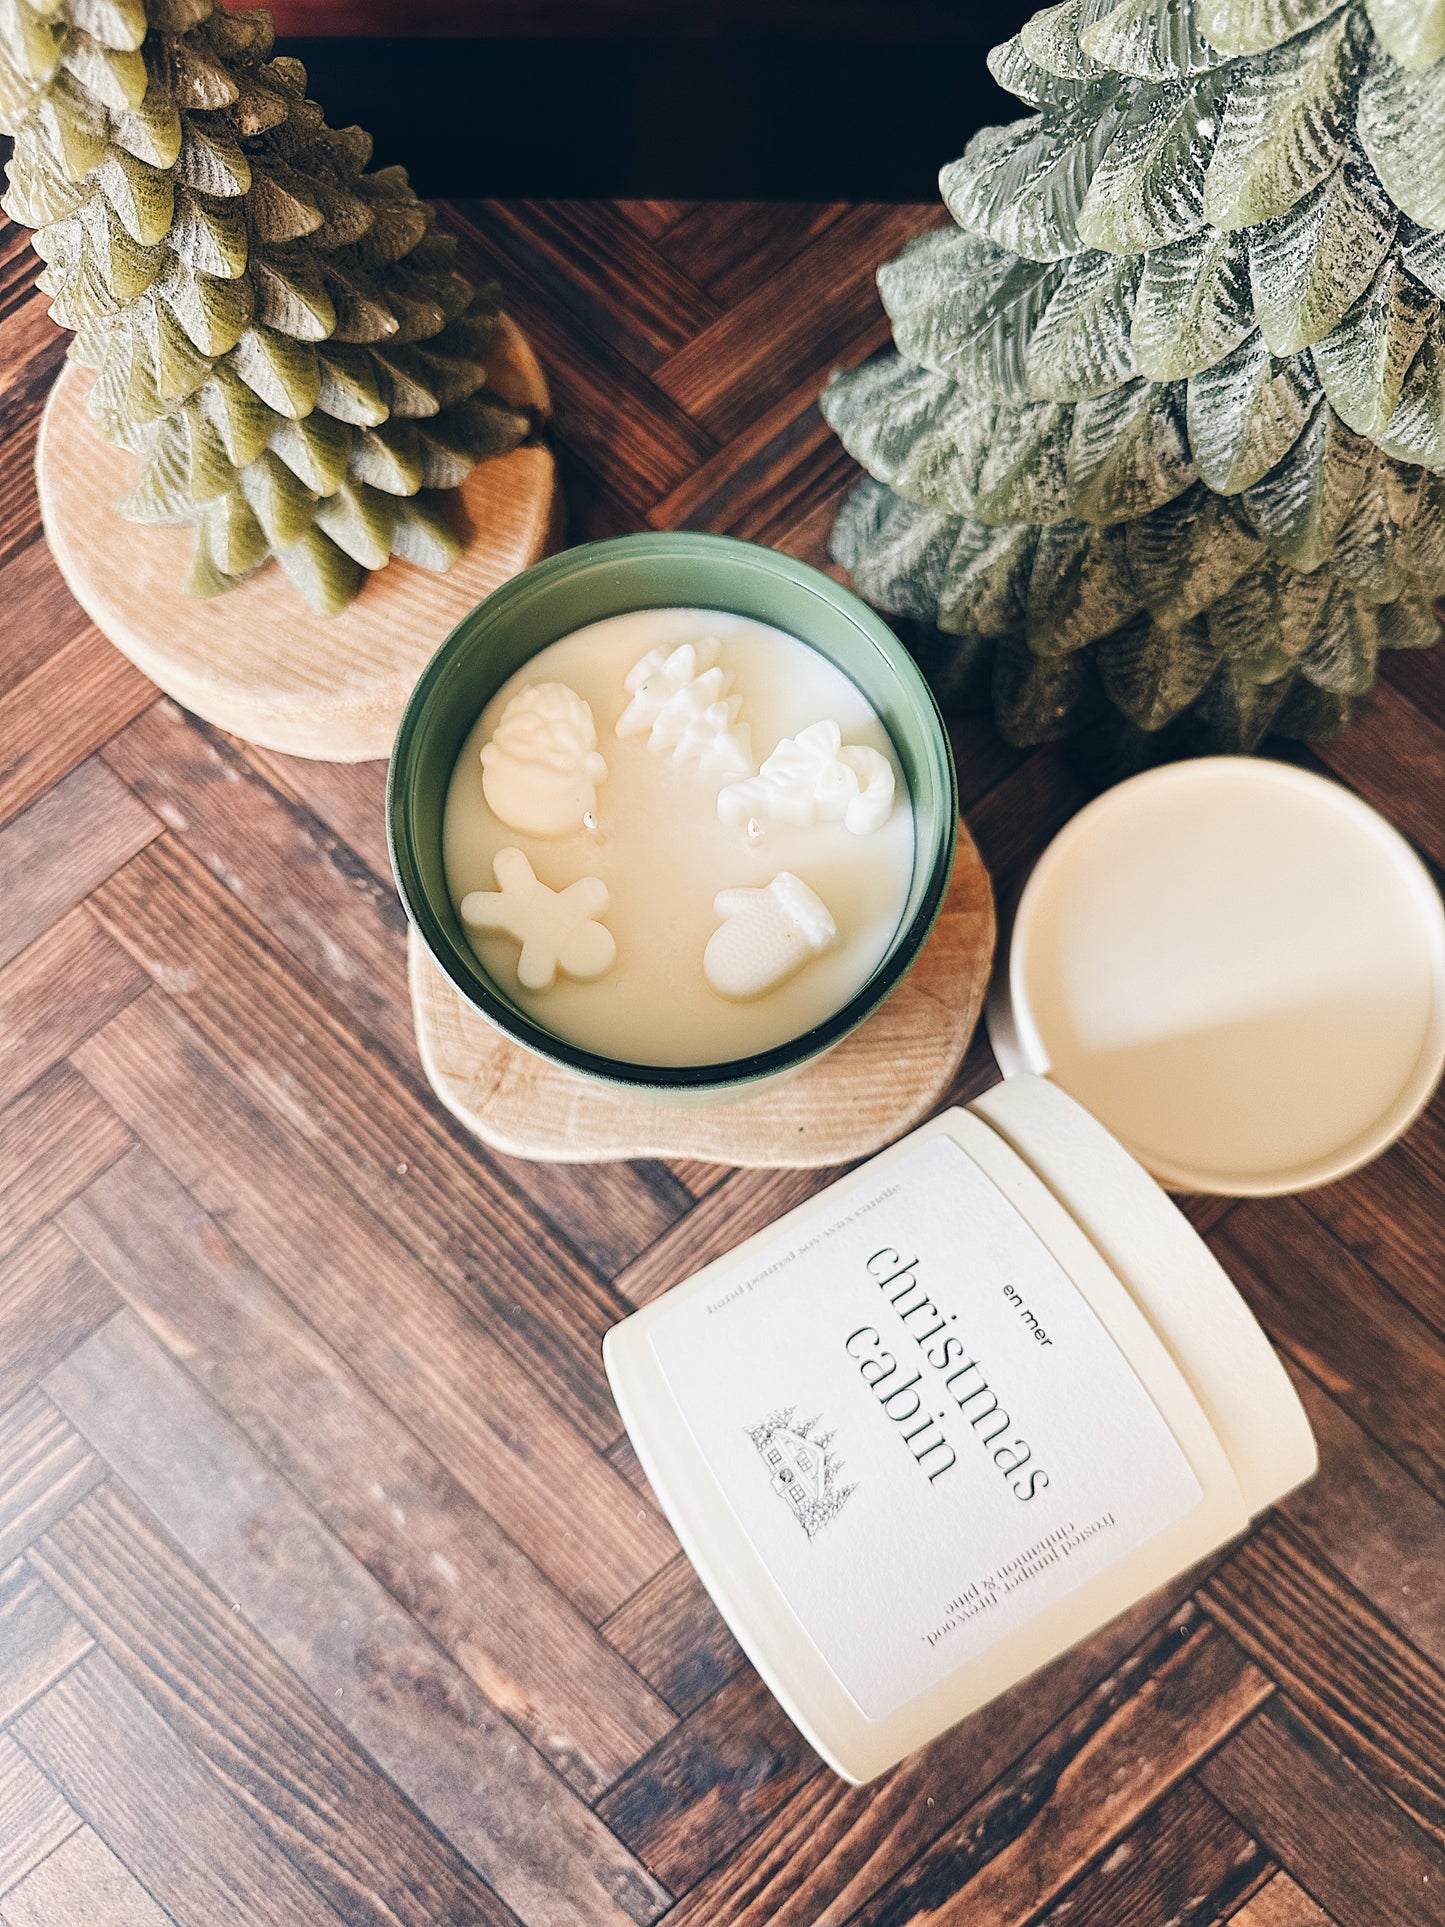 en mer | christmas cabin | gift boxed soy wax candle